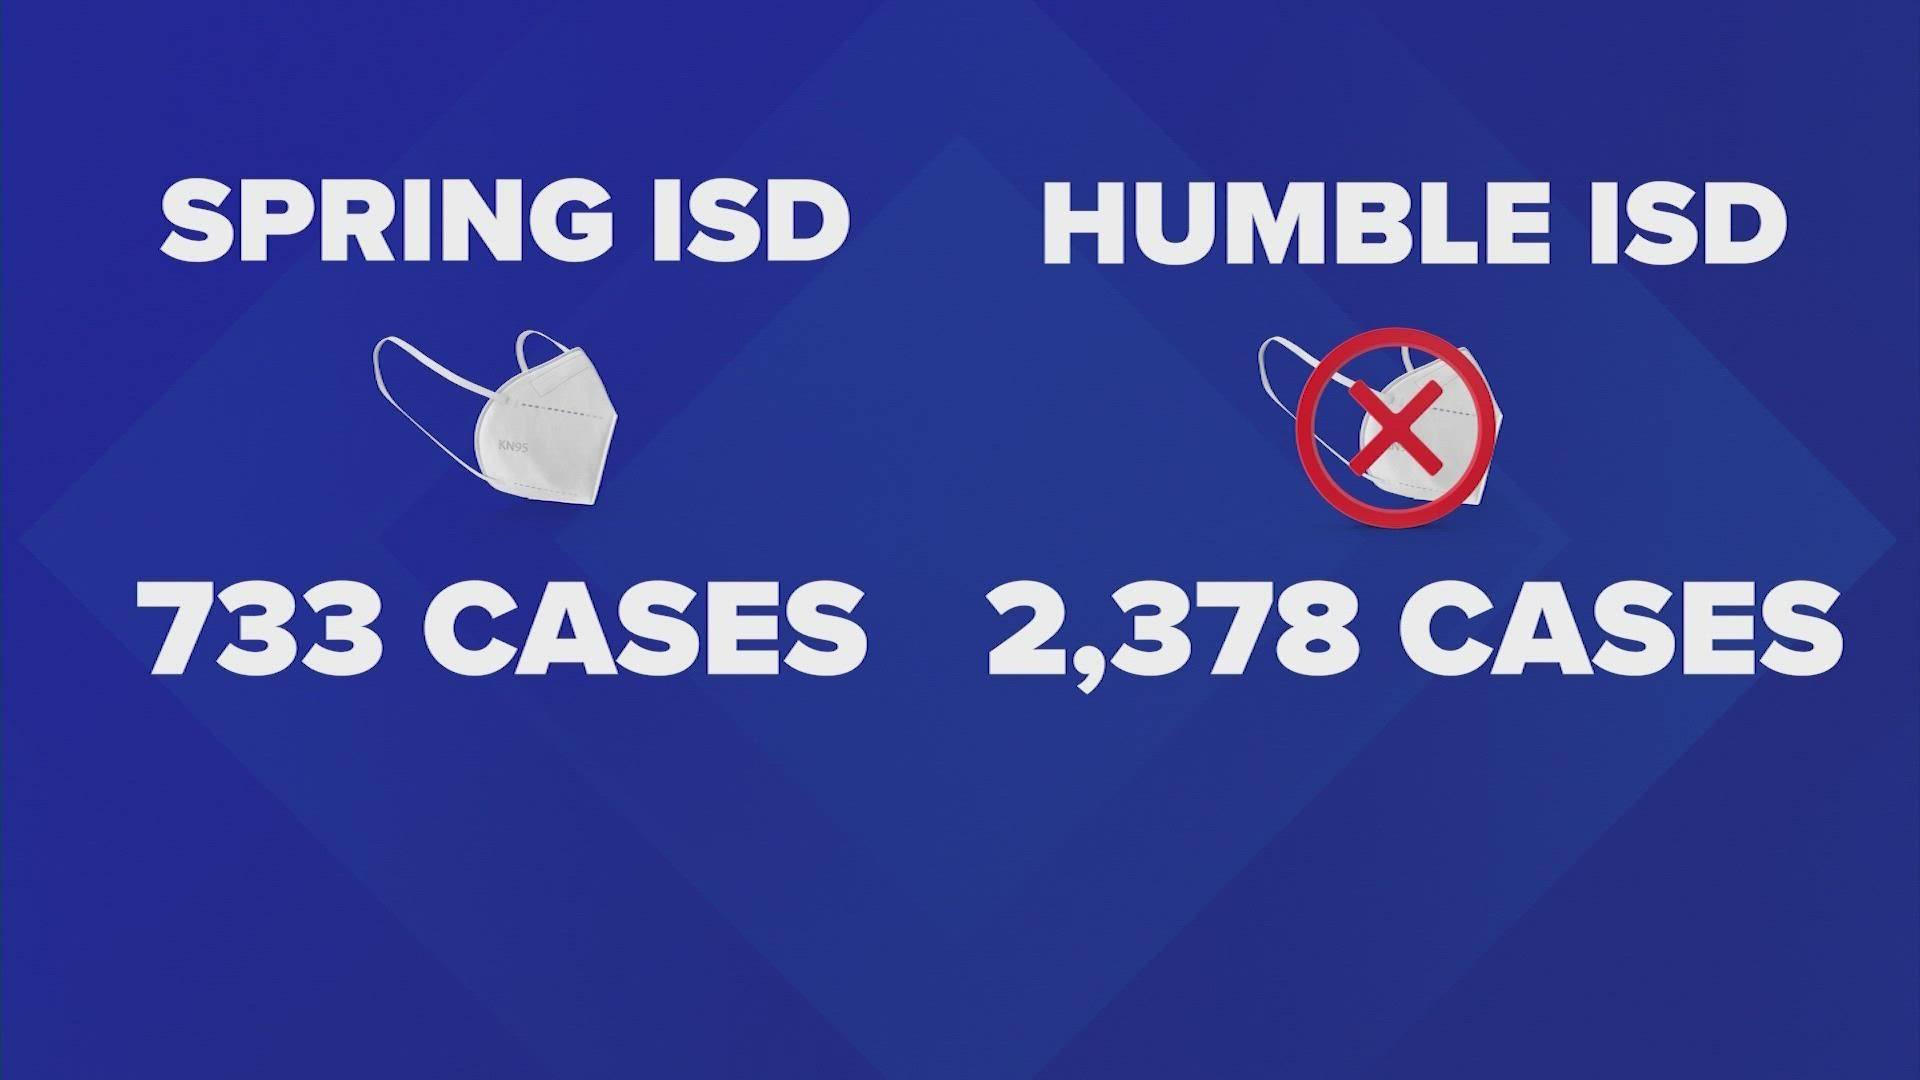 There is a lot of debate over masking in schools, so we compared Spring ISD, which has a mandate, to Humble ISD, which does not.